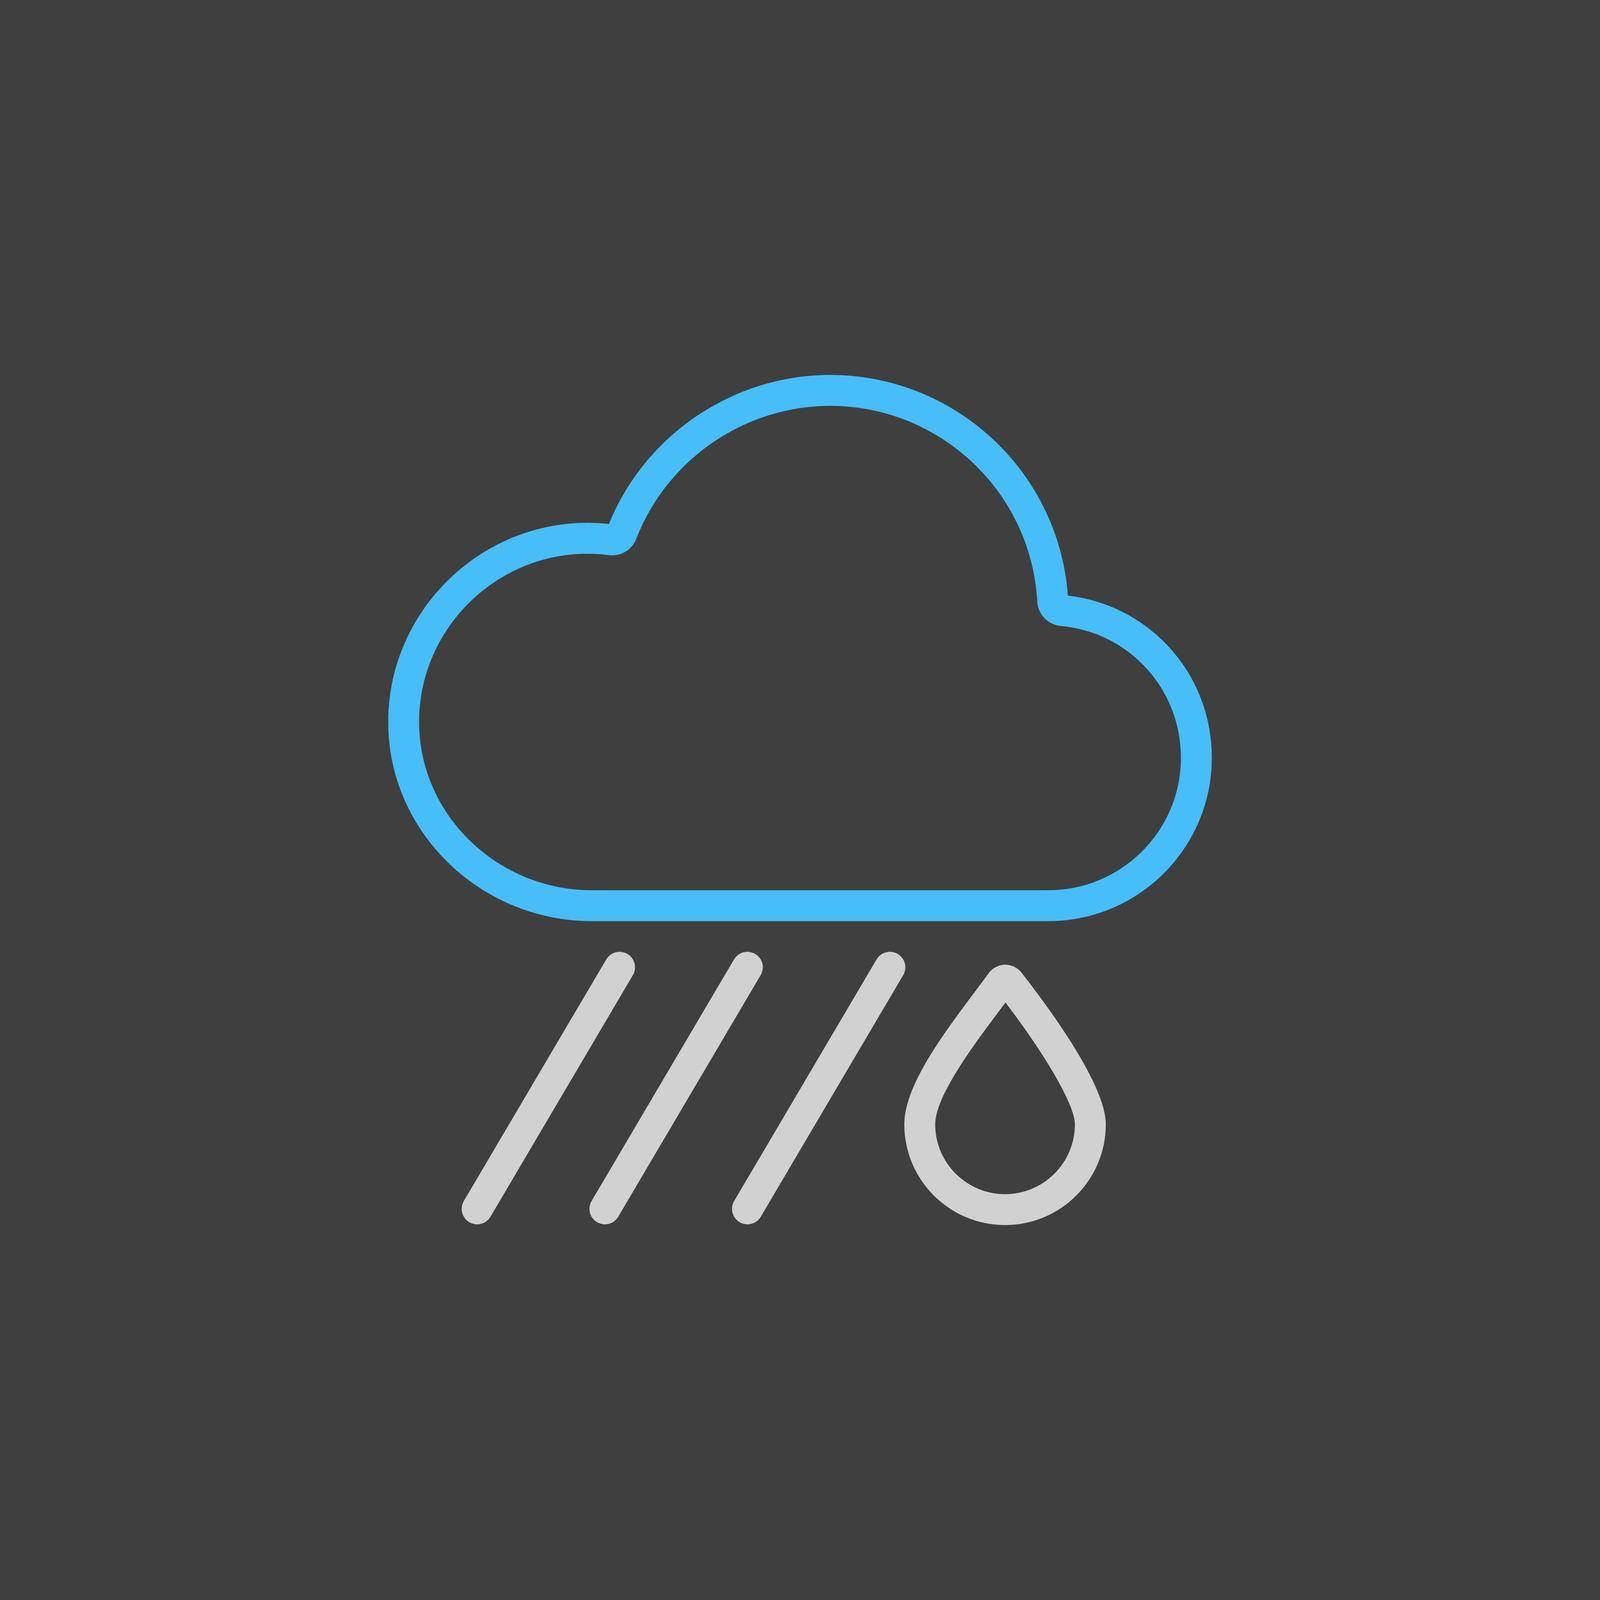 Raincloud with raindrop vector icon on dark background. Weather sign by nosik